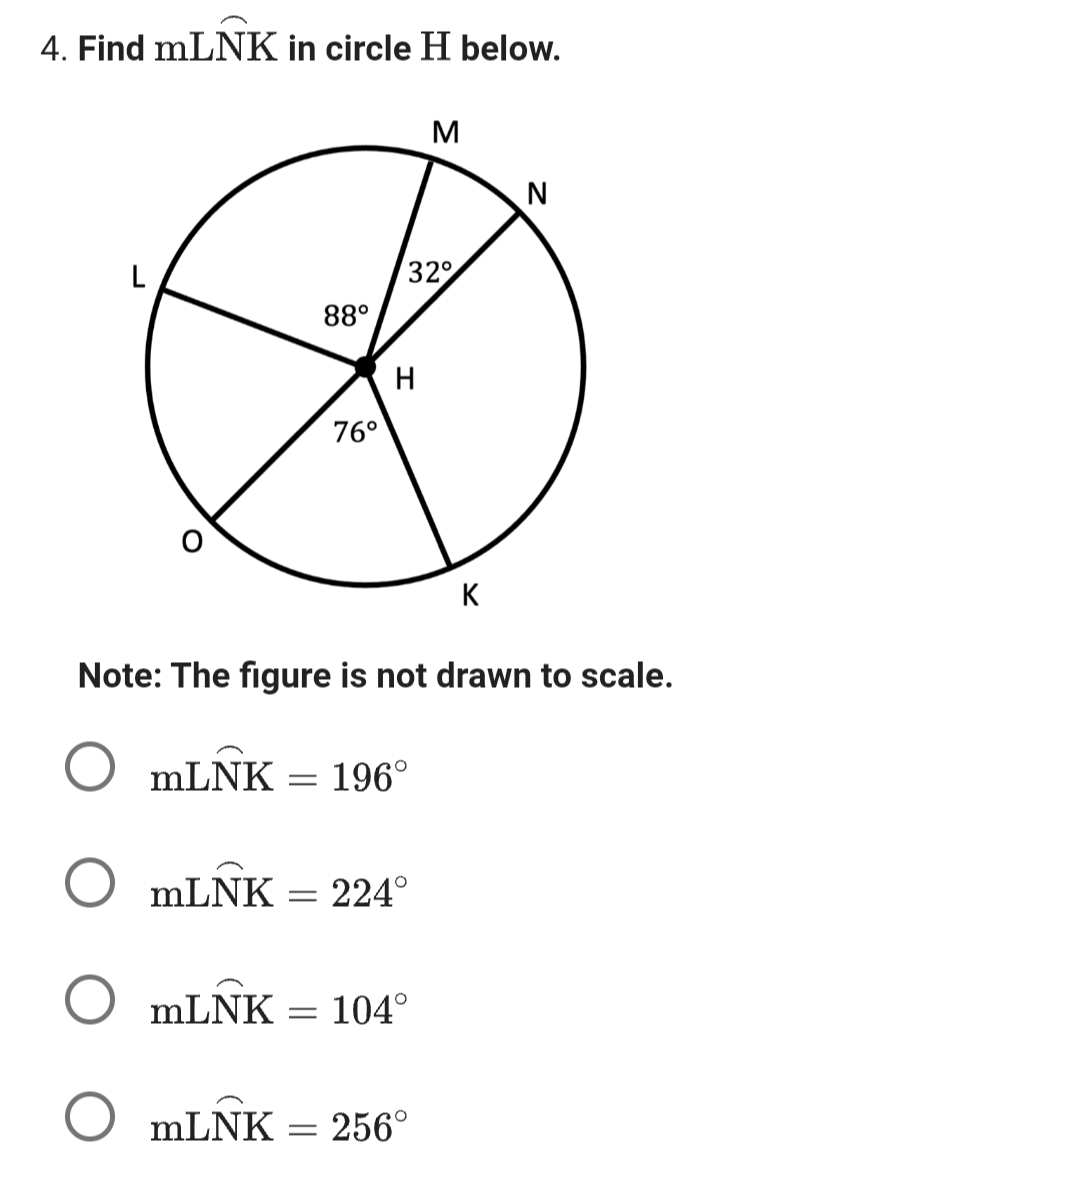 4. Find mLNK in circle H below.
L
mLNK
=
88⁰
76⁰
=
32°
H
Note: The figure is not drawn to scale.
196⁰
O mLNK
O mLNK 104°
O mLNK
M
224⁰
= 256°
K
N